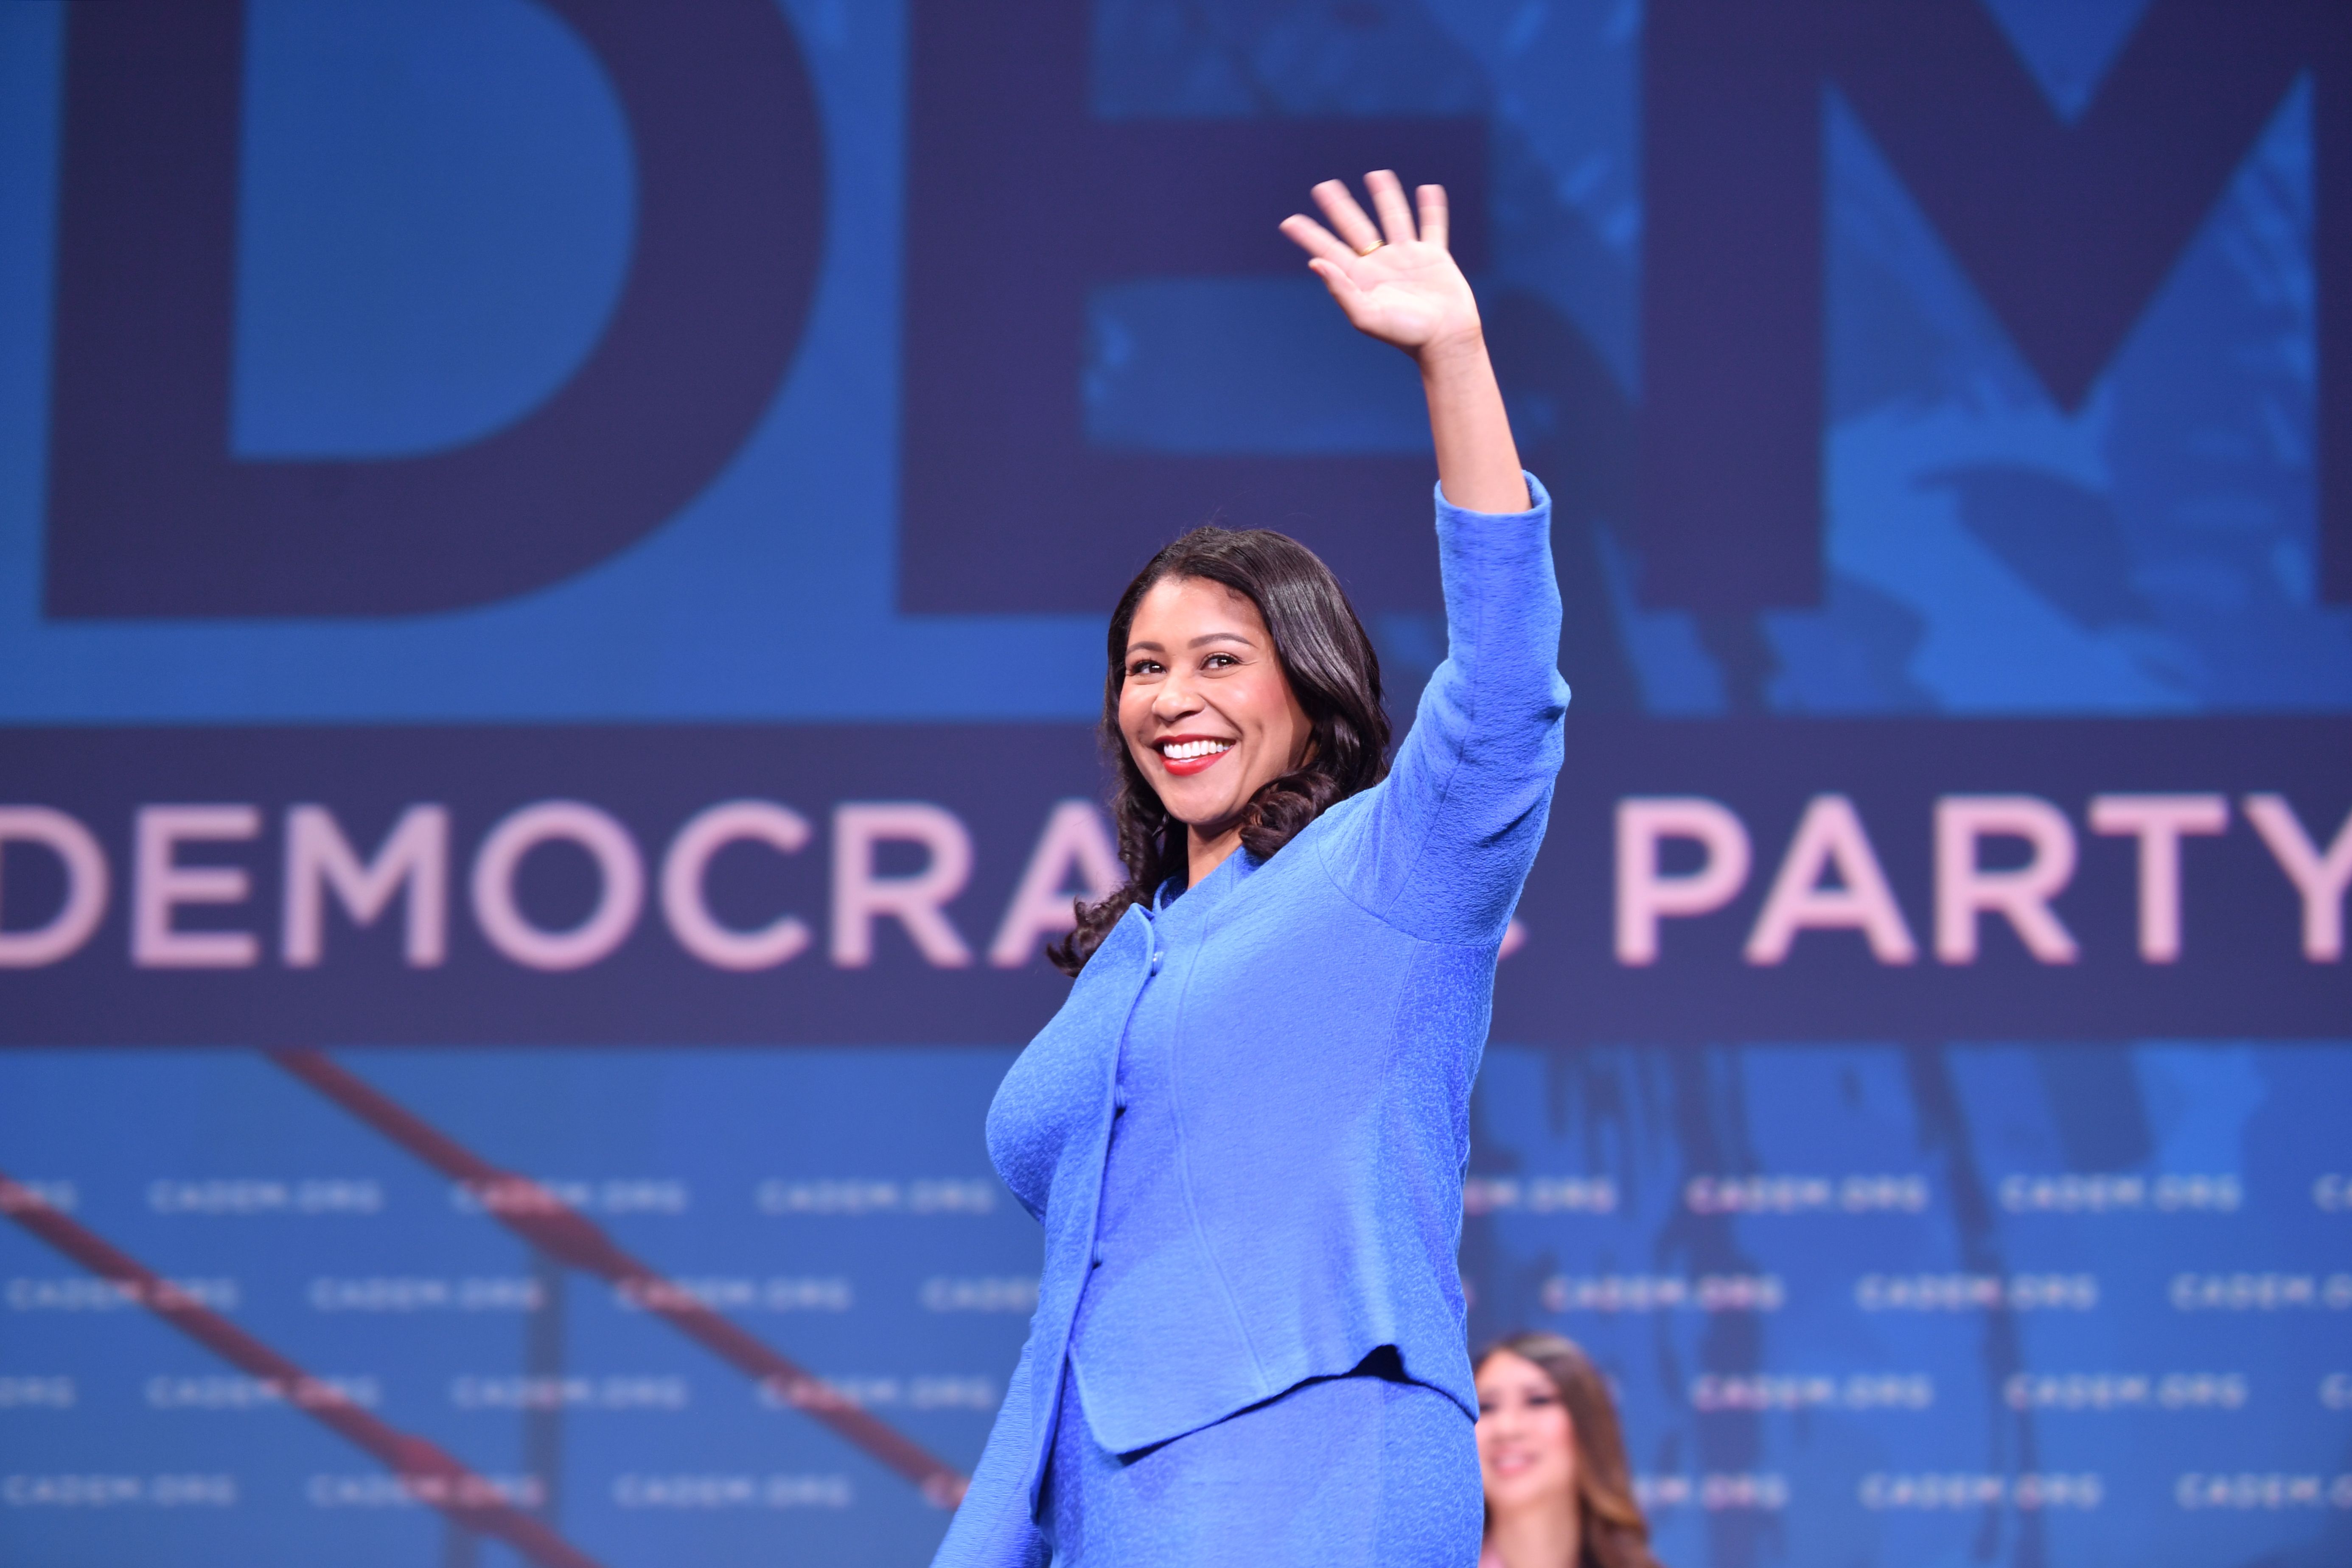 Mayor of San Francisco London Breed waves as she takes the stage during the 2019 California Democratic Party State Convention at Moscone Center in San Francisco on June 1, 2019. (JOSH EDELSON/AFP/Getty Images)